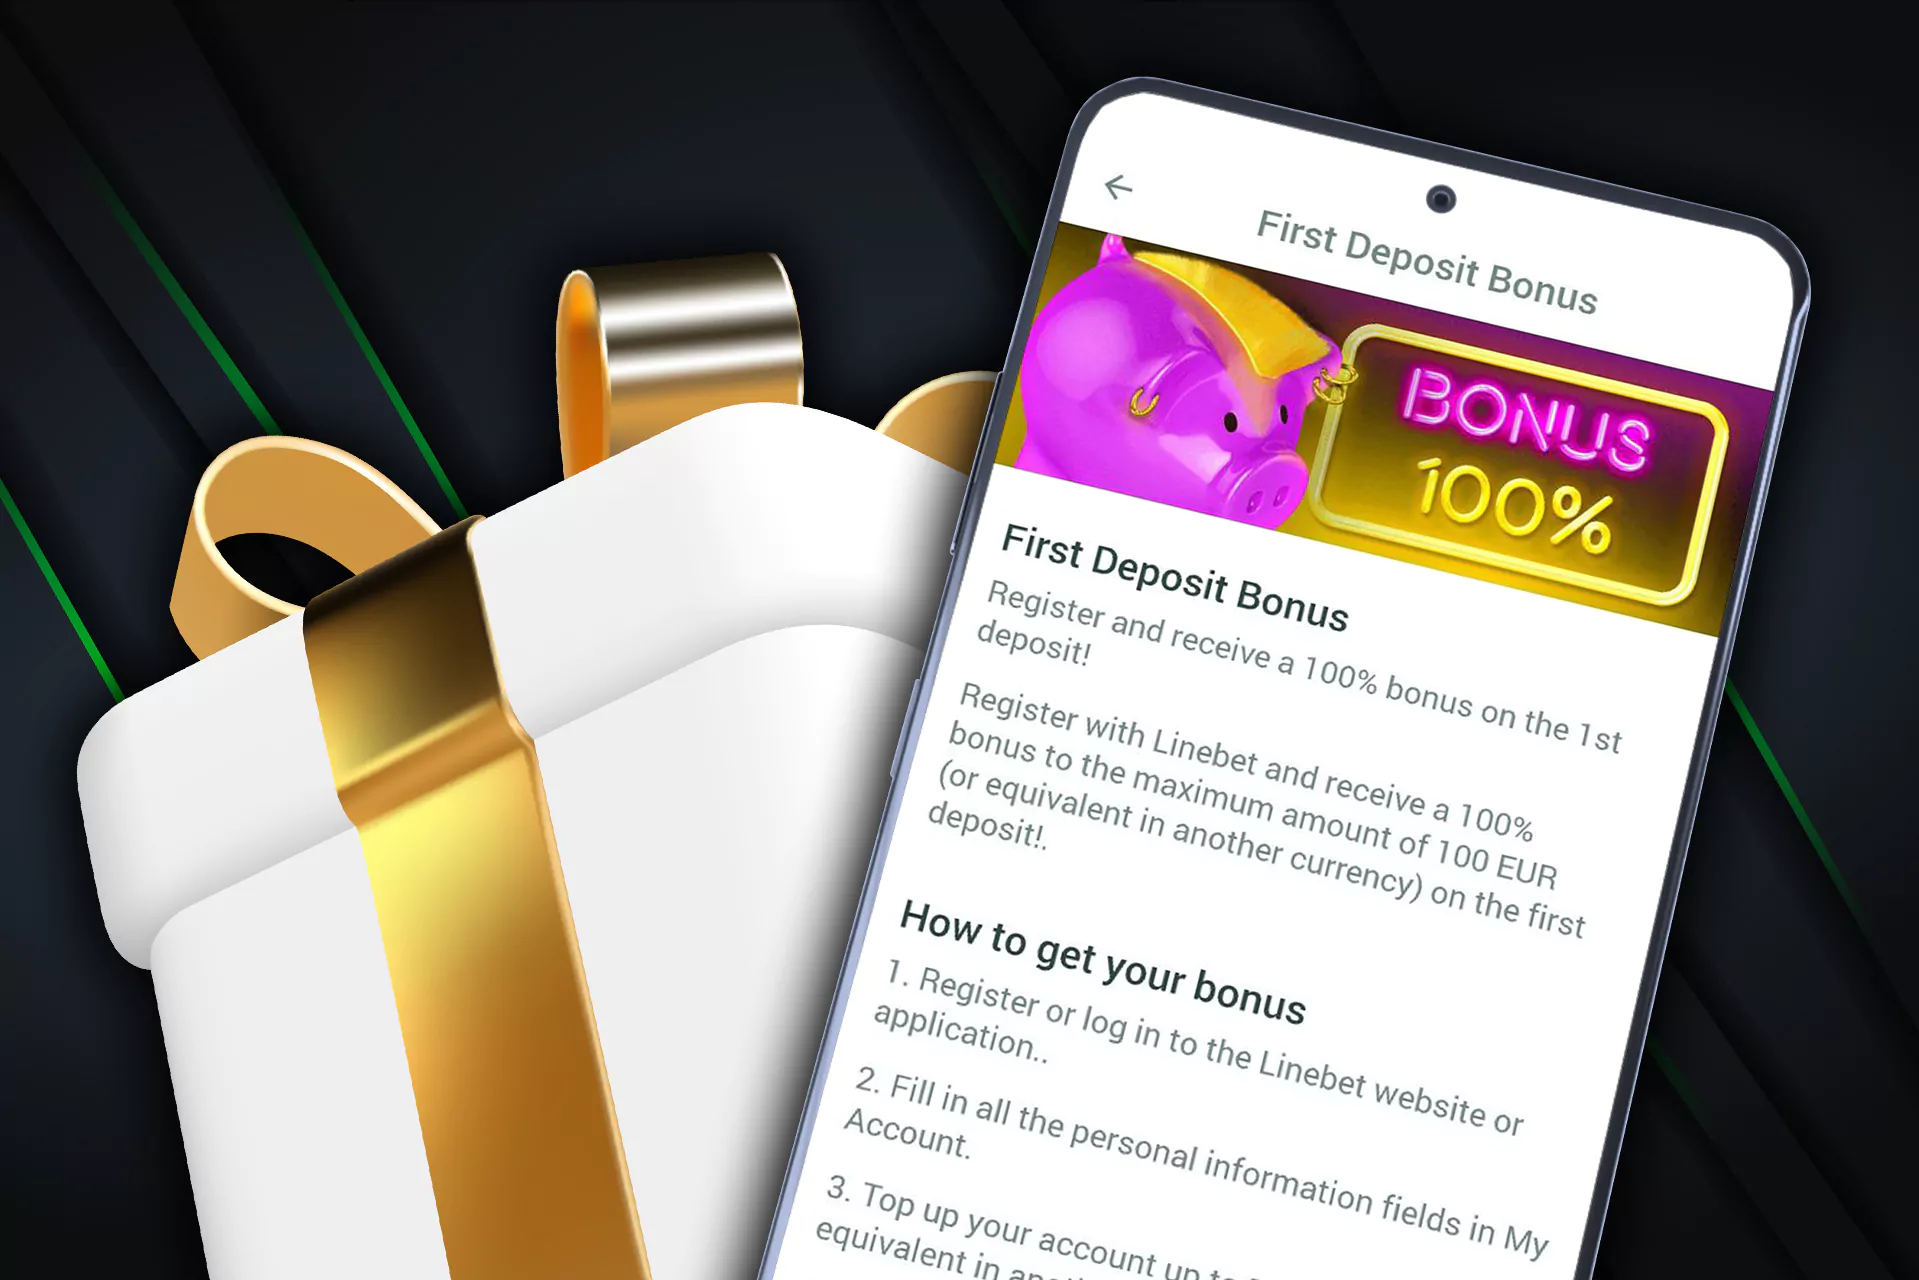 Get up to 100% on your first deposit as a betting bonus.